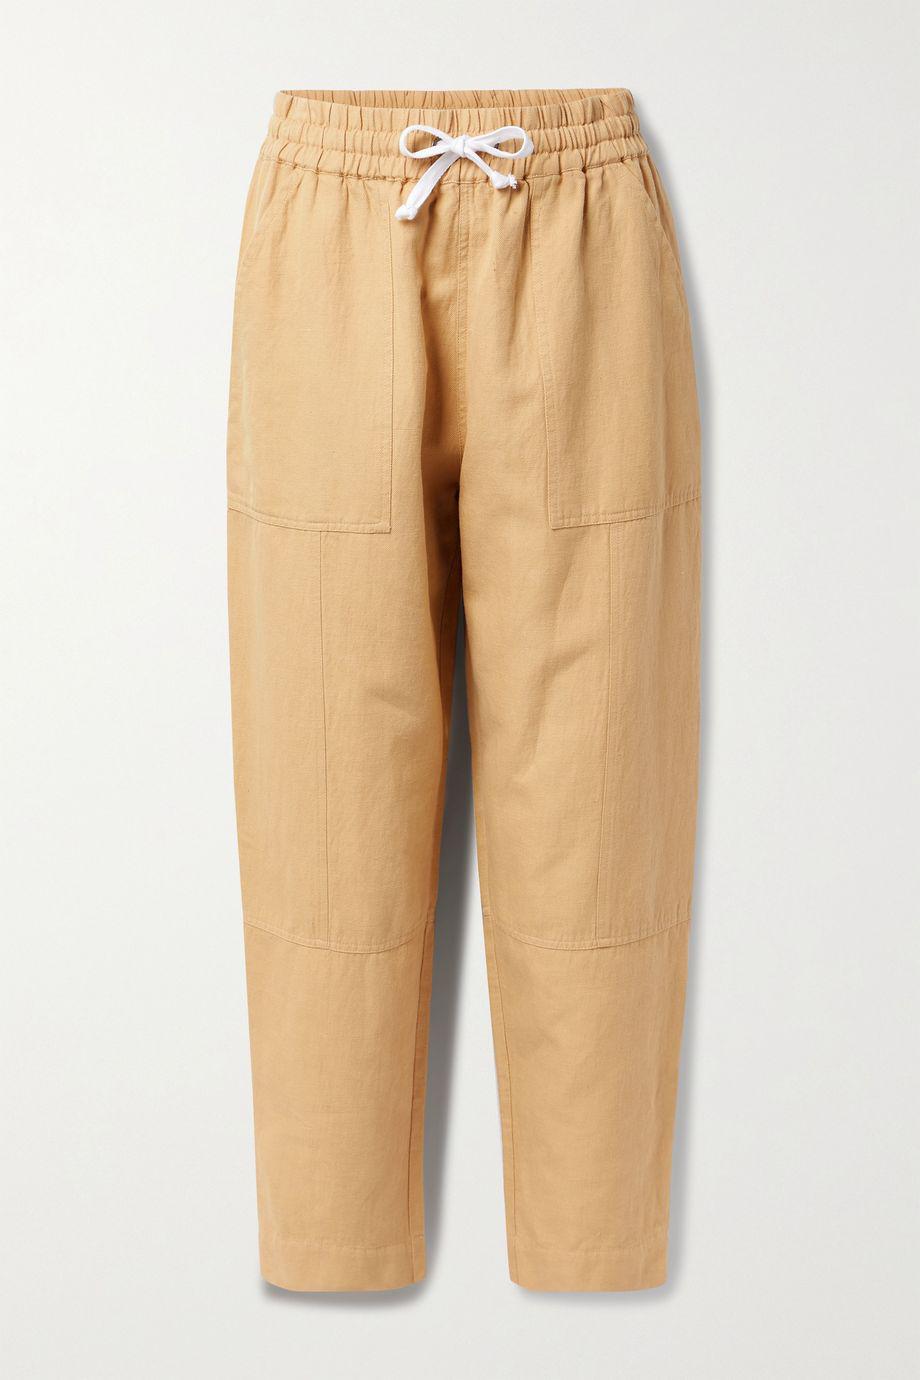 Surf paneled linen-twill tapered pants by APIECE APART